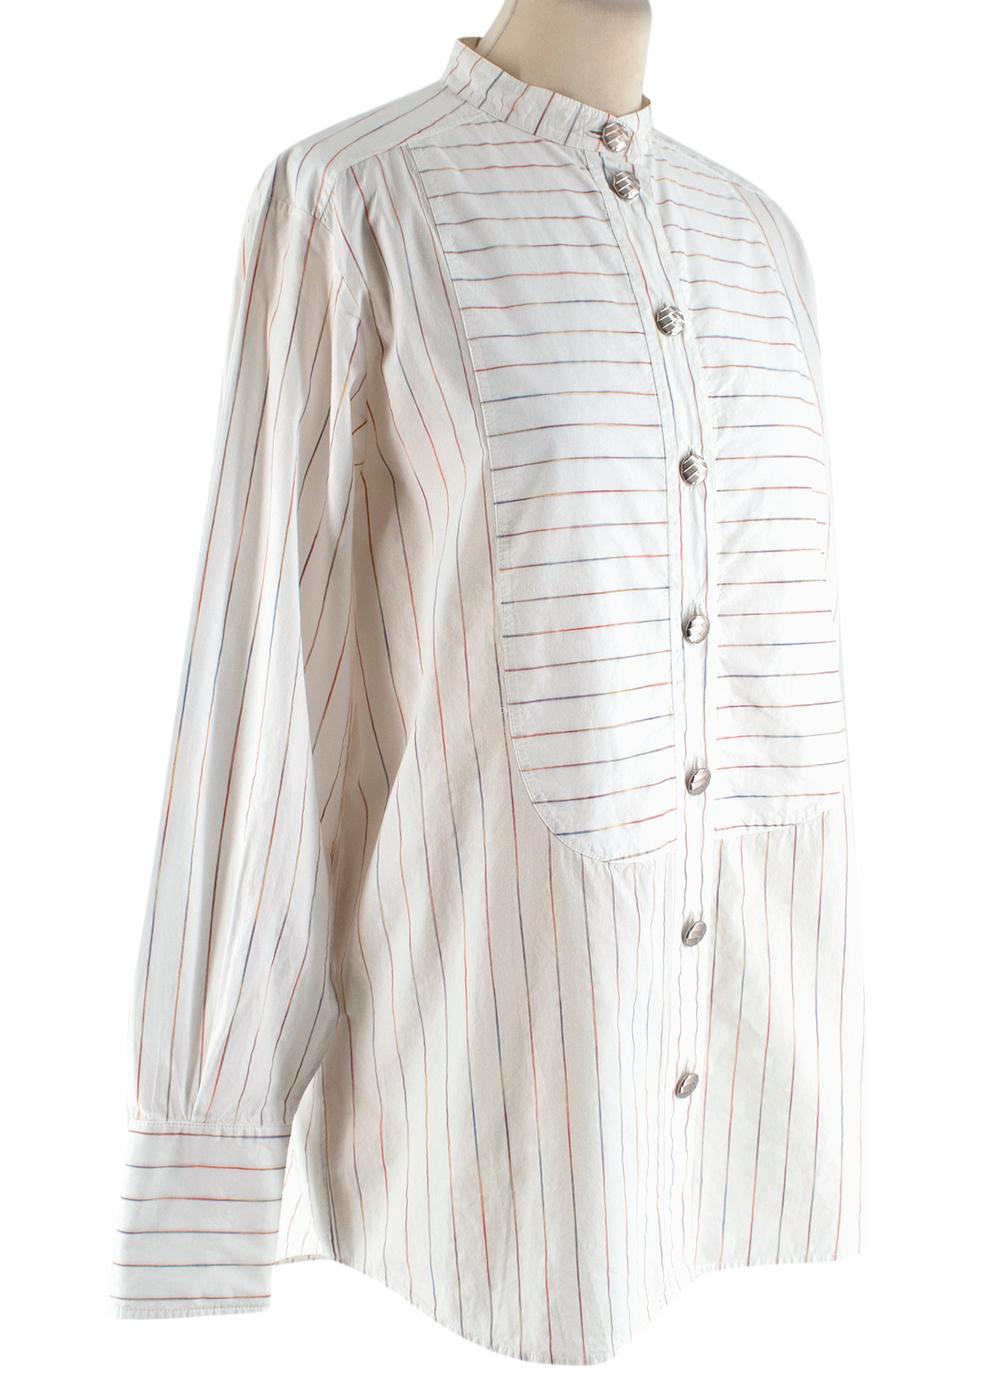 Chanel White Pinstripe Shirt
Collarless Shirt
Rainbow stripes
Silver buttons with detail and Chanel logo
100% cotton
Made in Italy

43cm shoulder
53cm shoulder
59cm sleeve with 11cm cuff
68cm length
